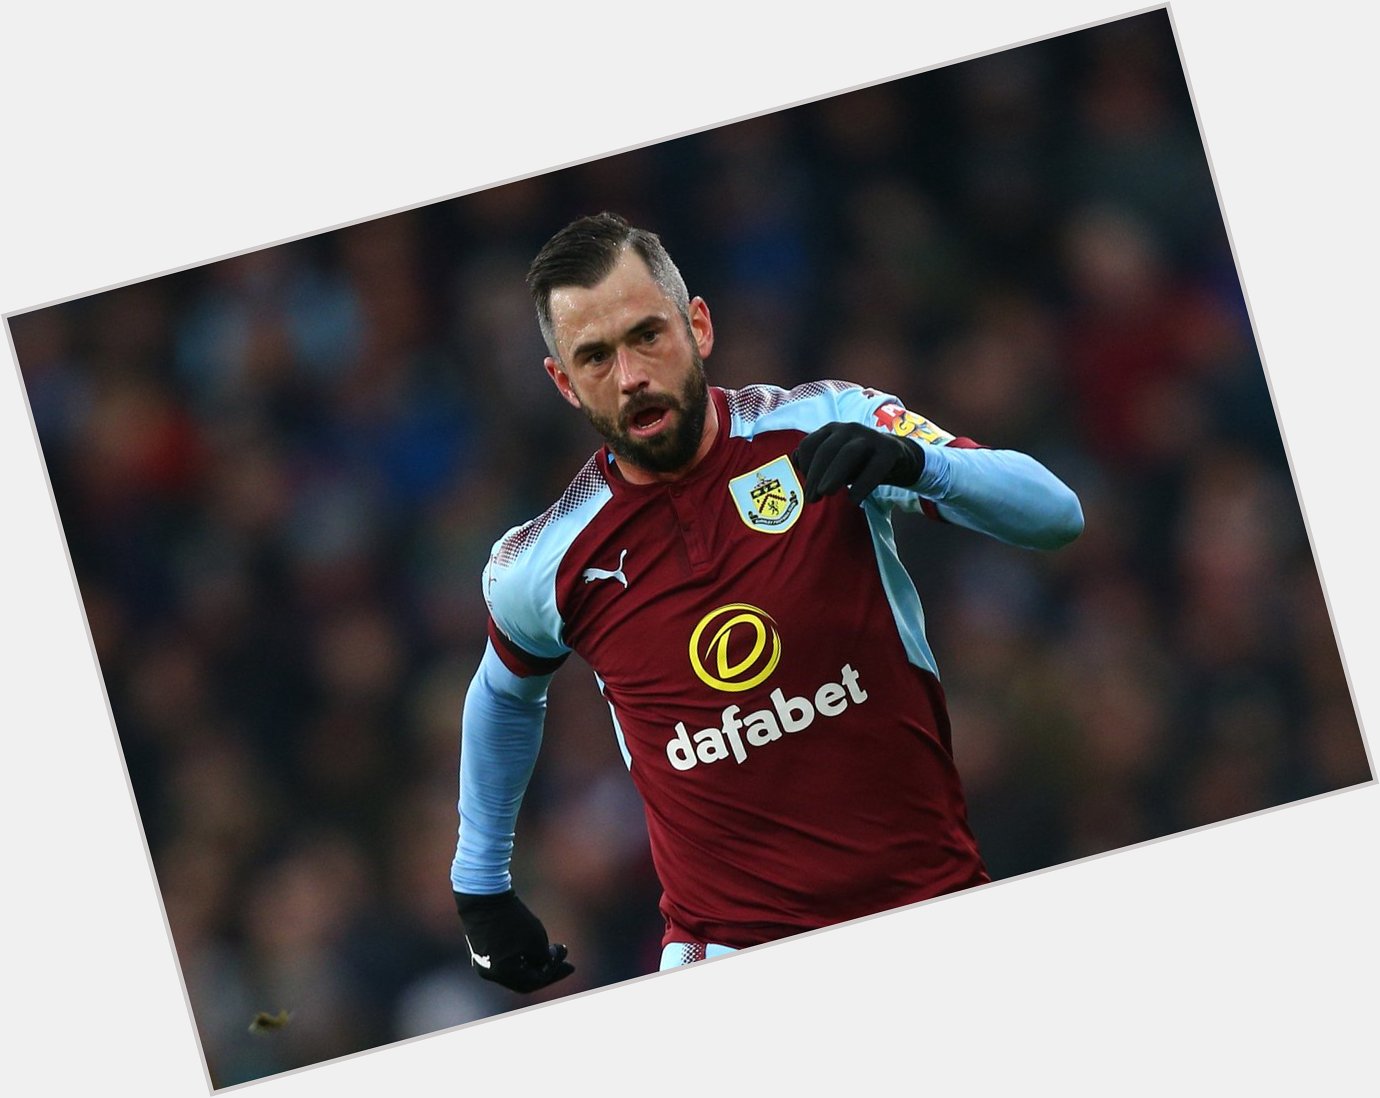 Happy birthday to Burnley and Belgium midfielder Steven Defour, who turns 30 today! 